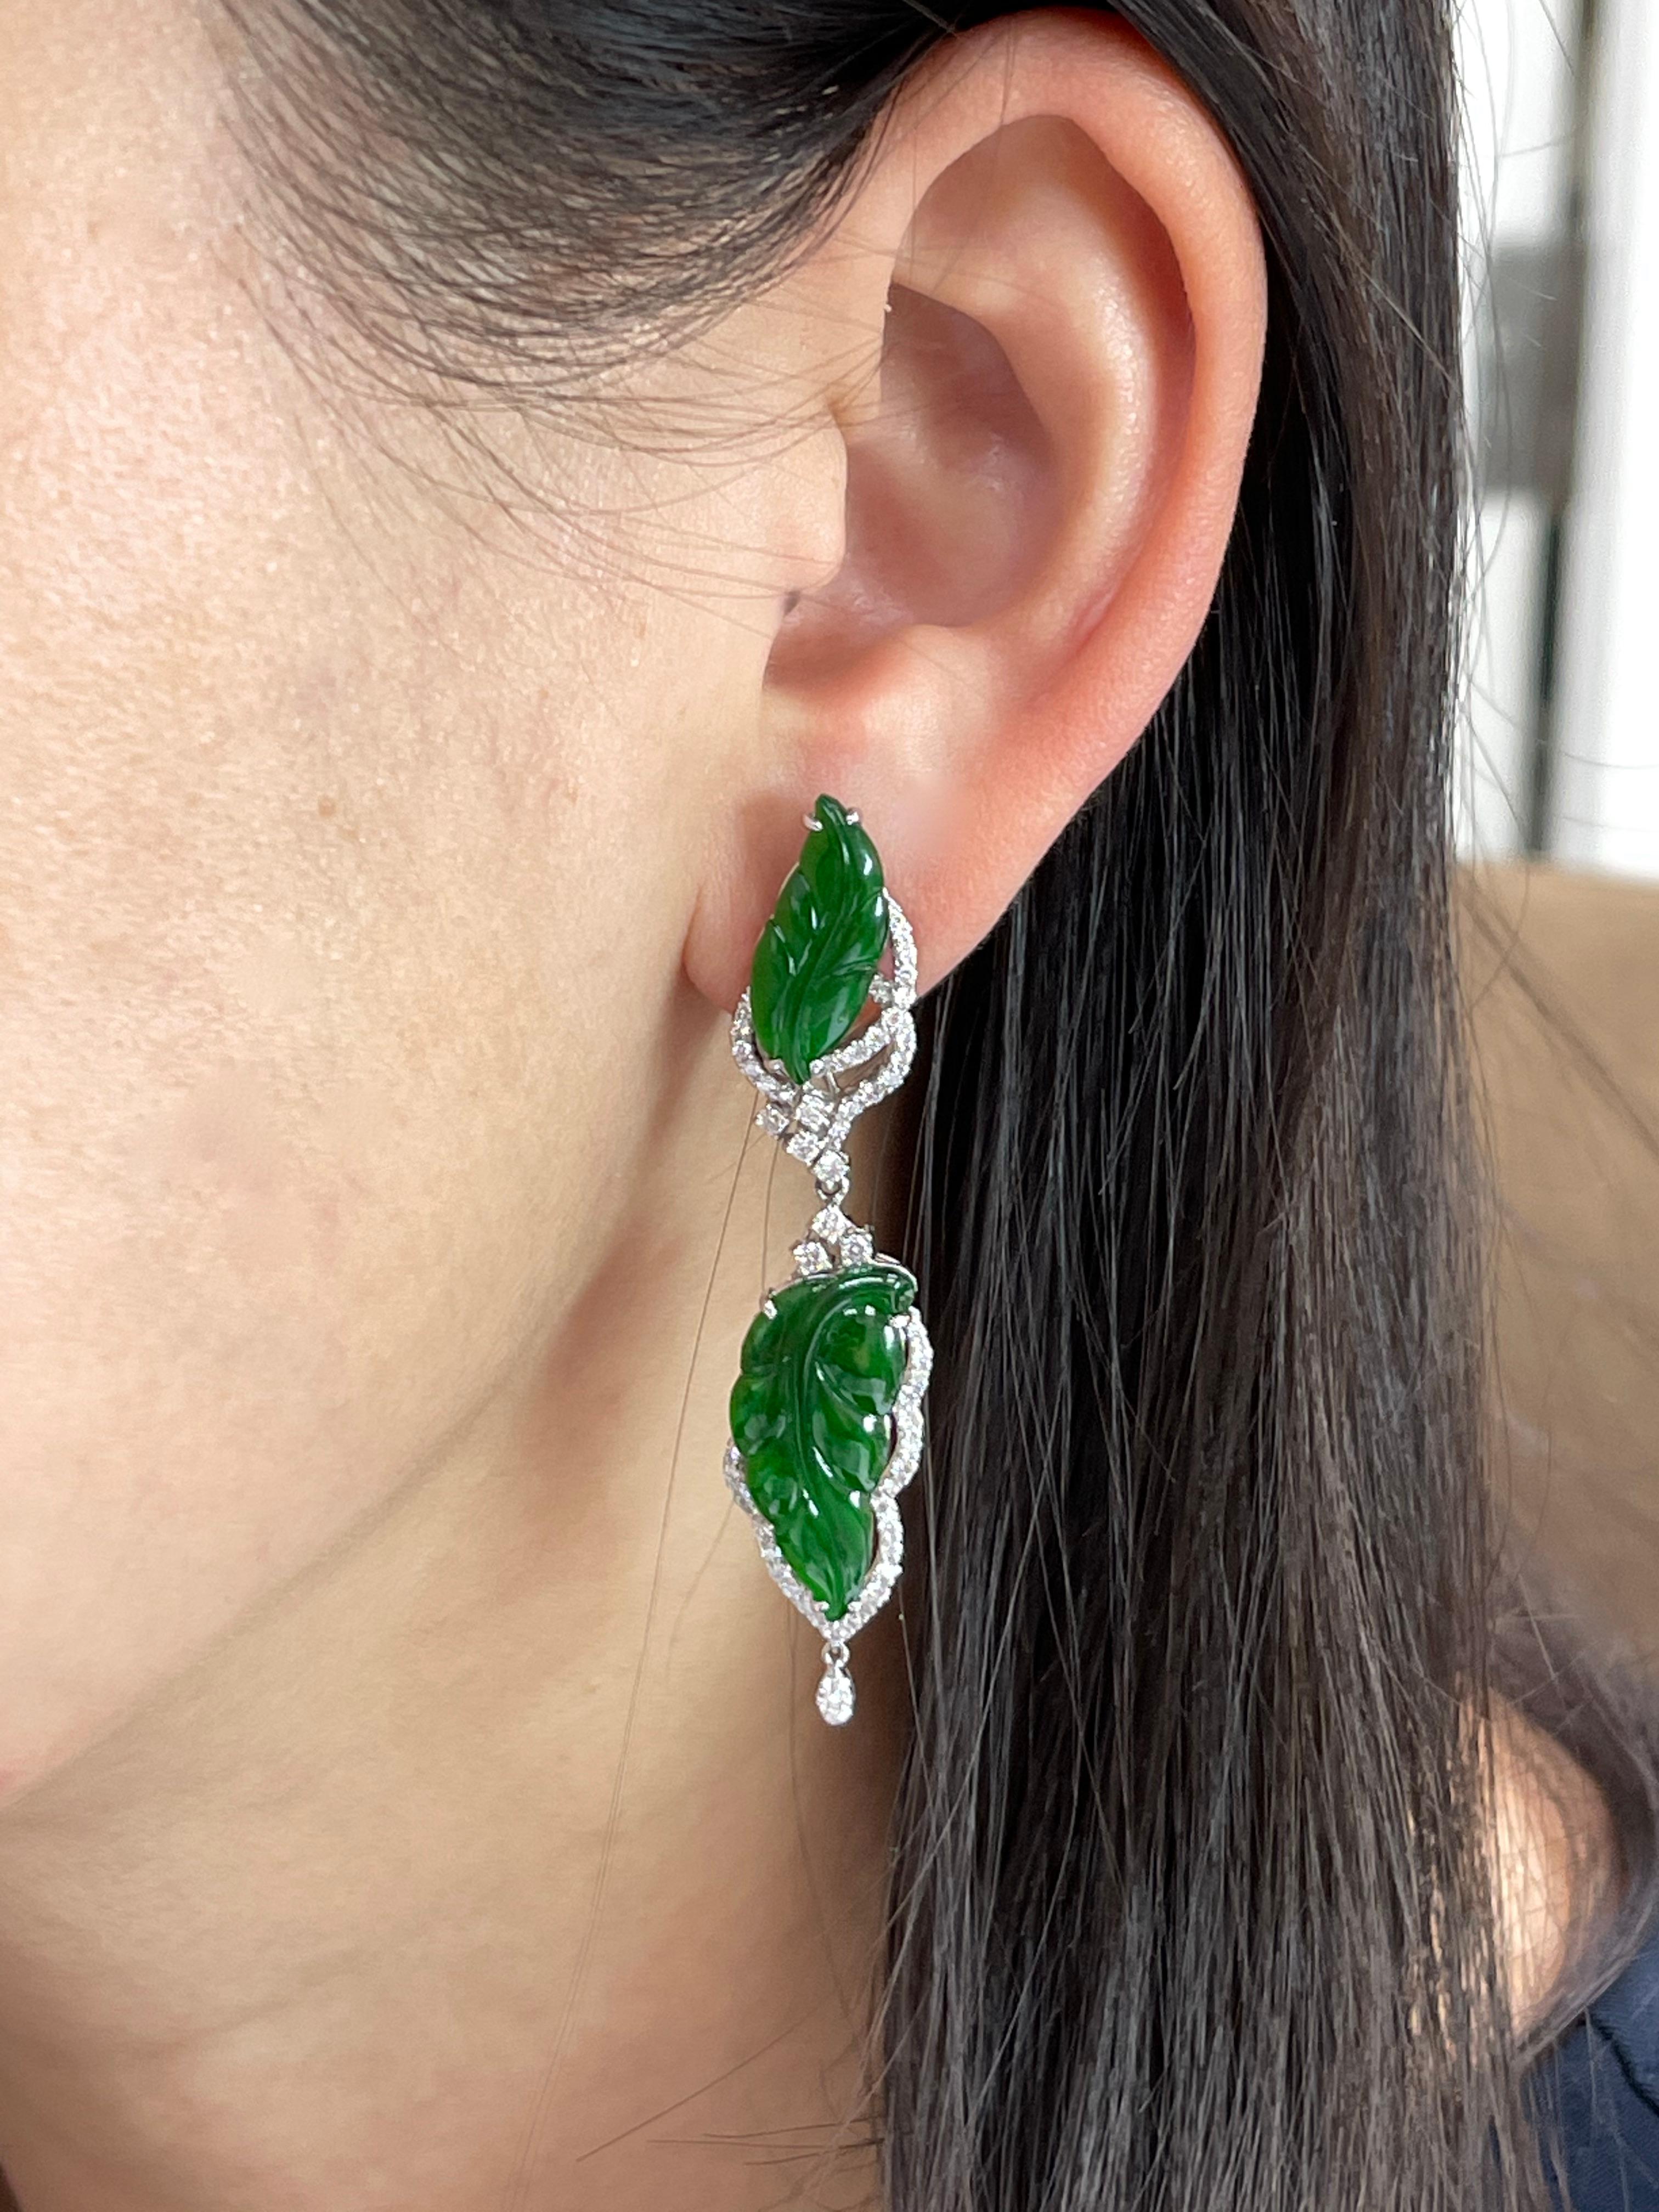 This is certified to be natural jadeite jade. These earrings has the best imperial green color and on the certificate it is graded 